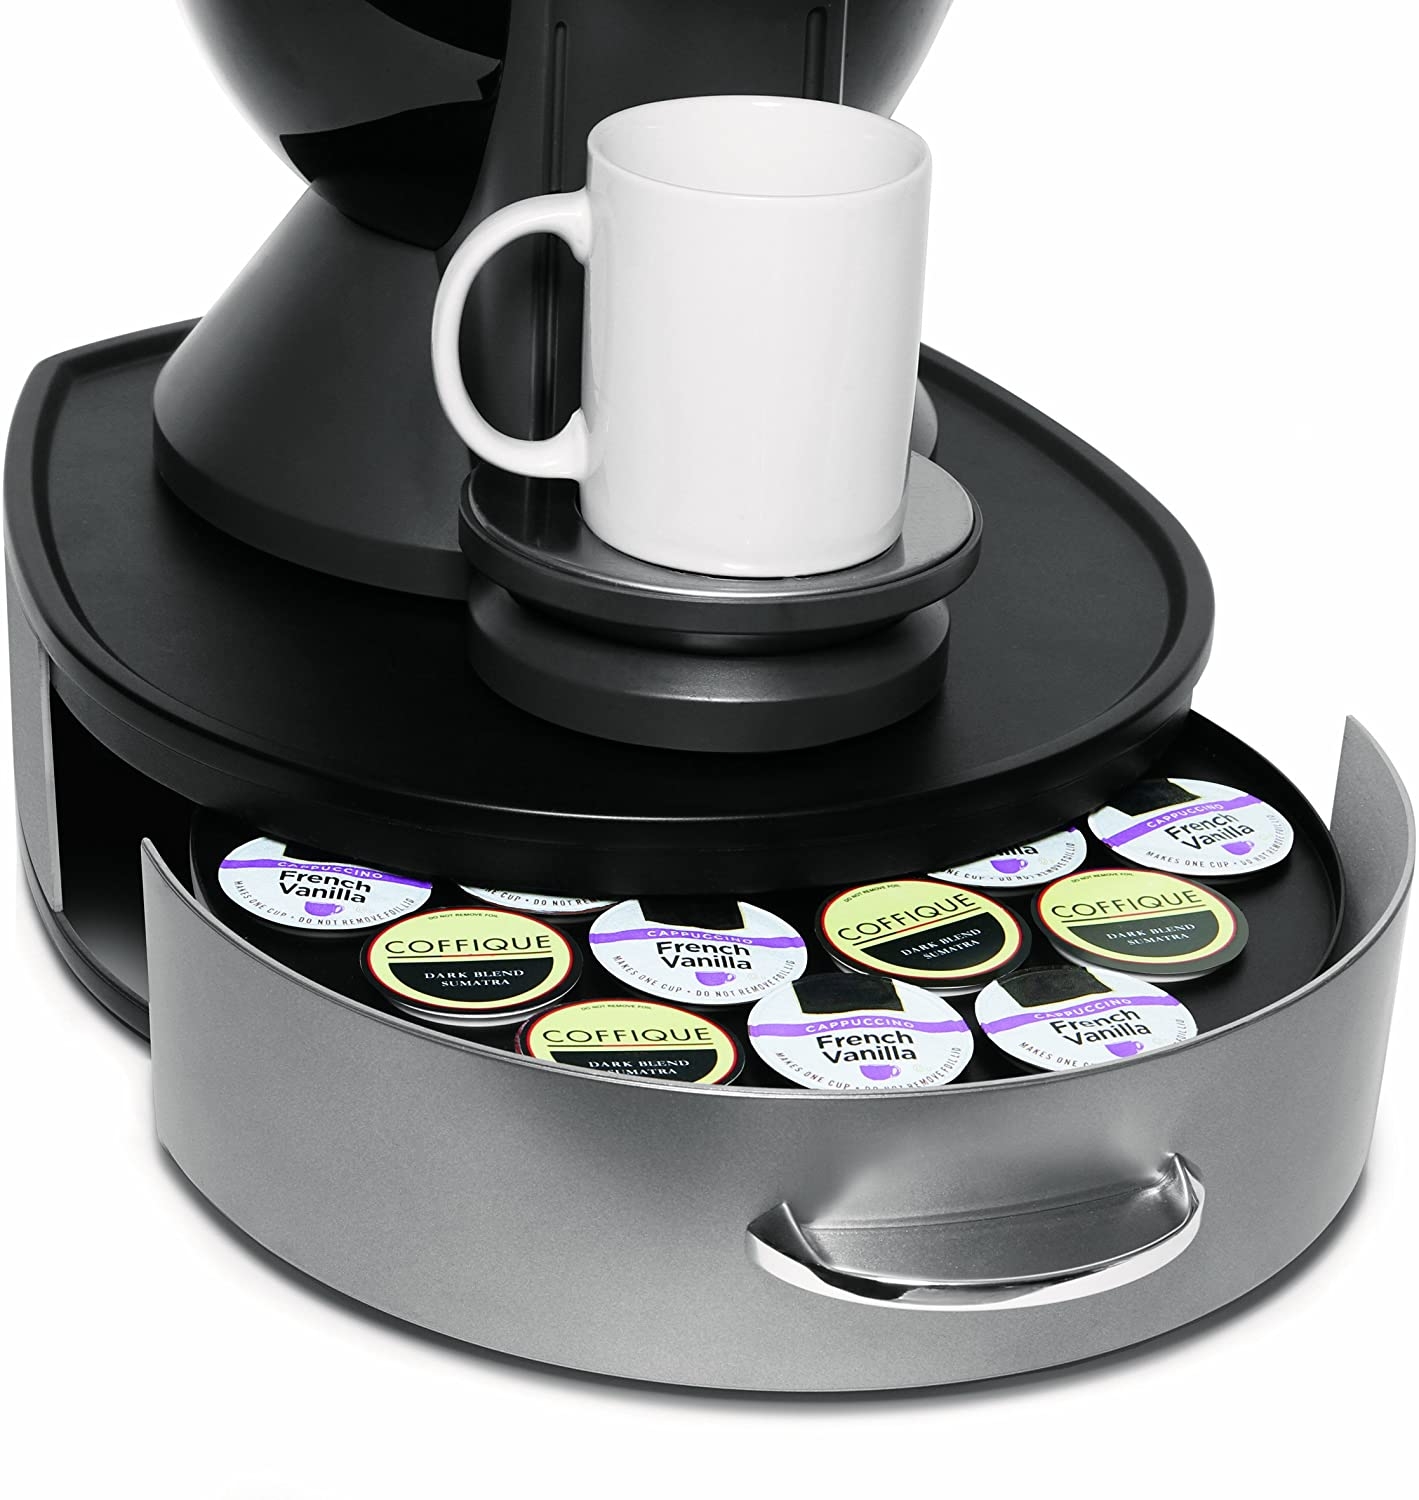 Coffee K-Cup Pod Spinning Carousel Storage Holder Keurig Hold 35 K Cup in Black 